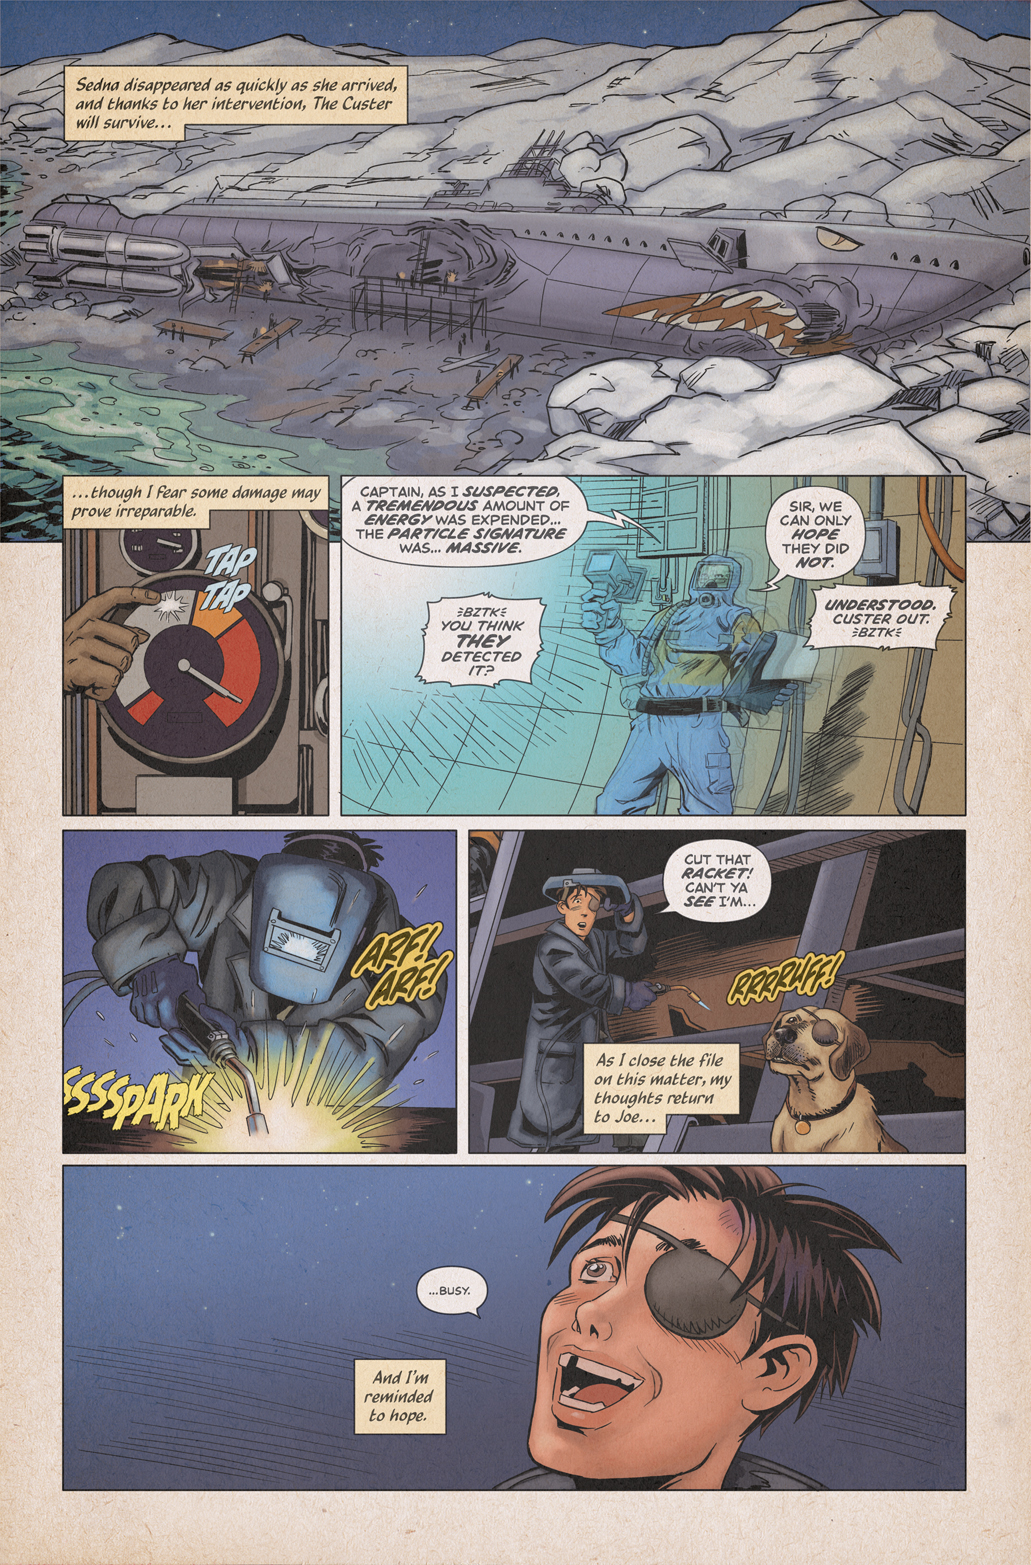 Secret of the Beaufort Sea – Page 39